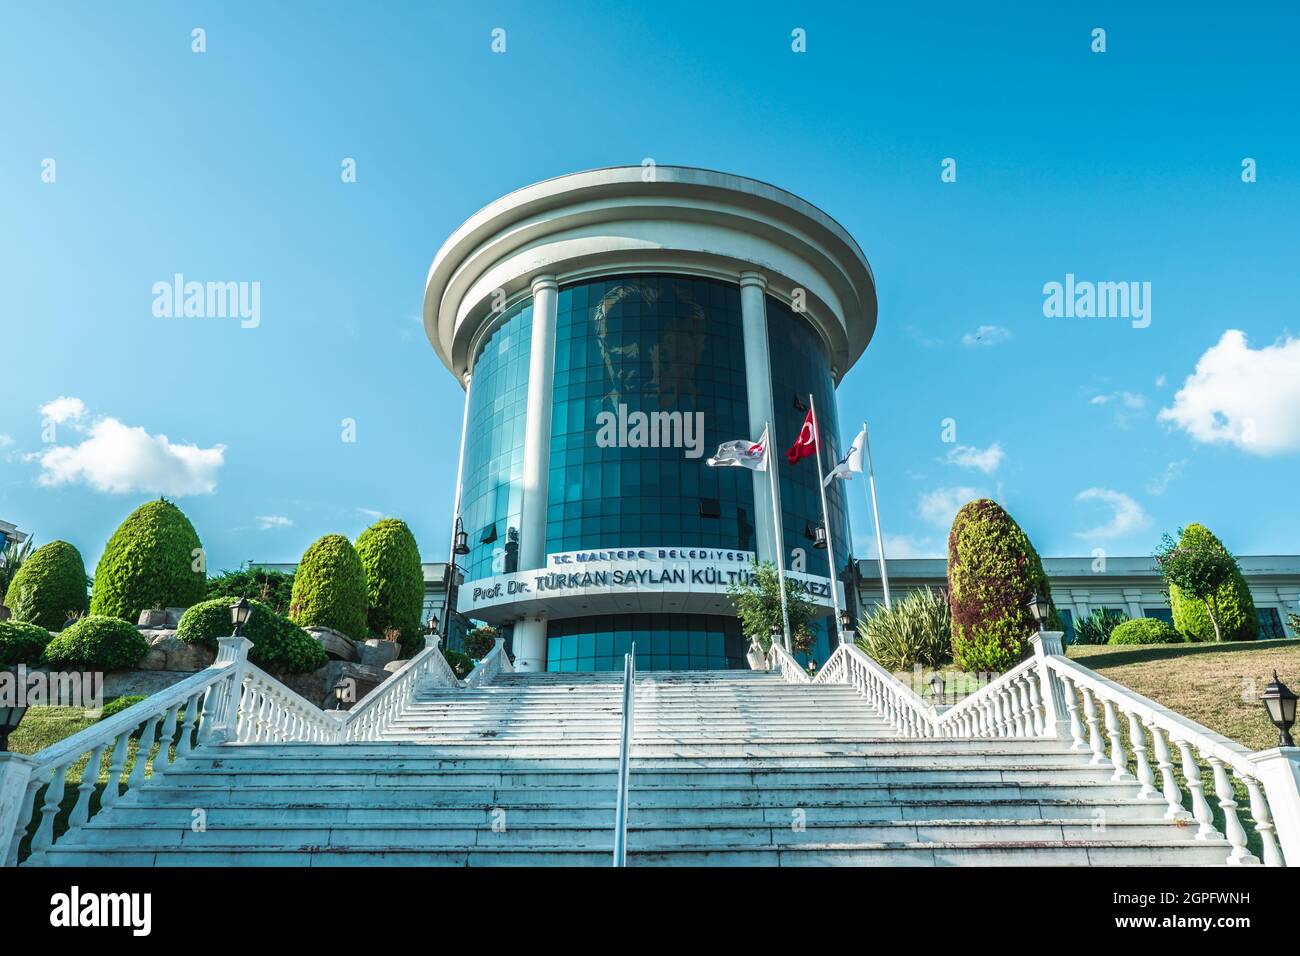 Maltepe, Istanbul, Turkey - 07.23.2021: wide angle view of the municipality building Turkan Saylan Cultural Center where public courses and social org Stock Photo